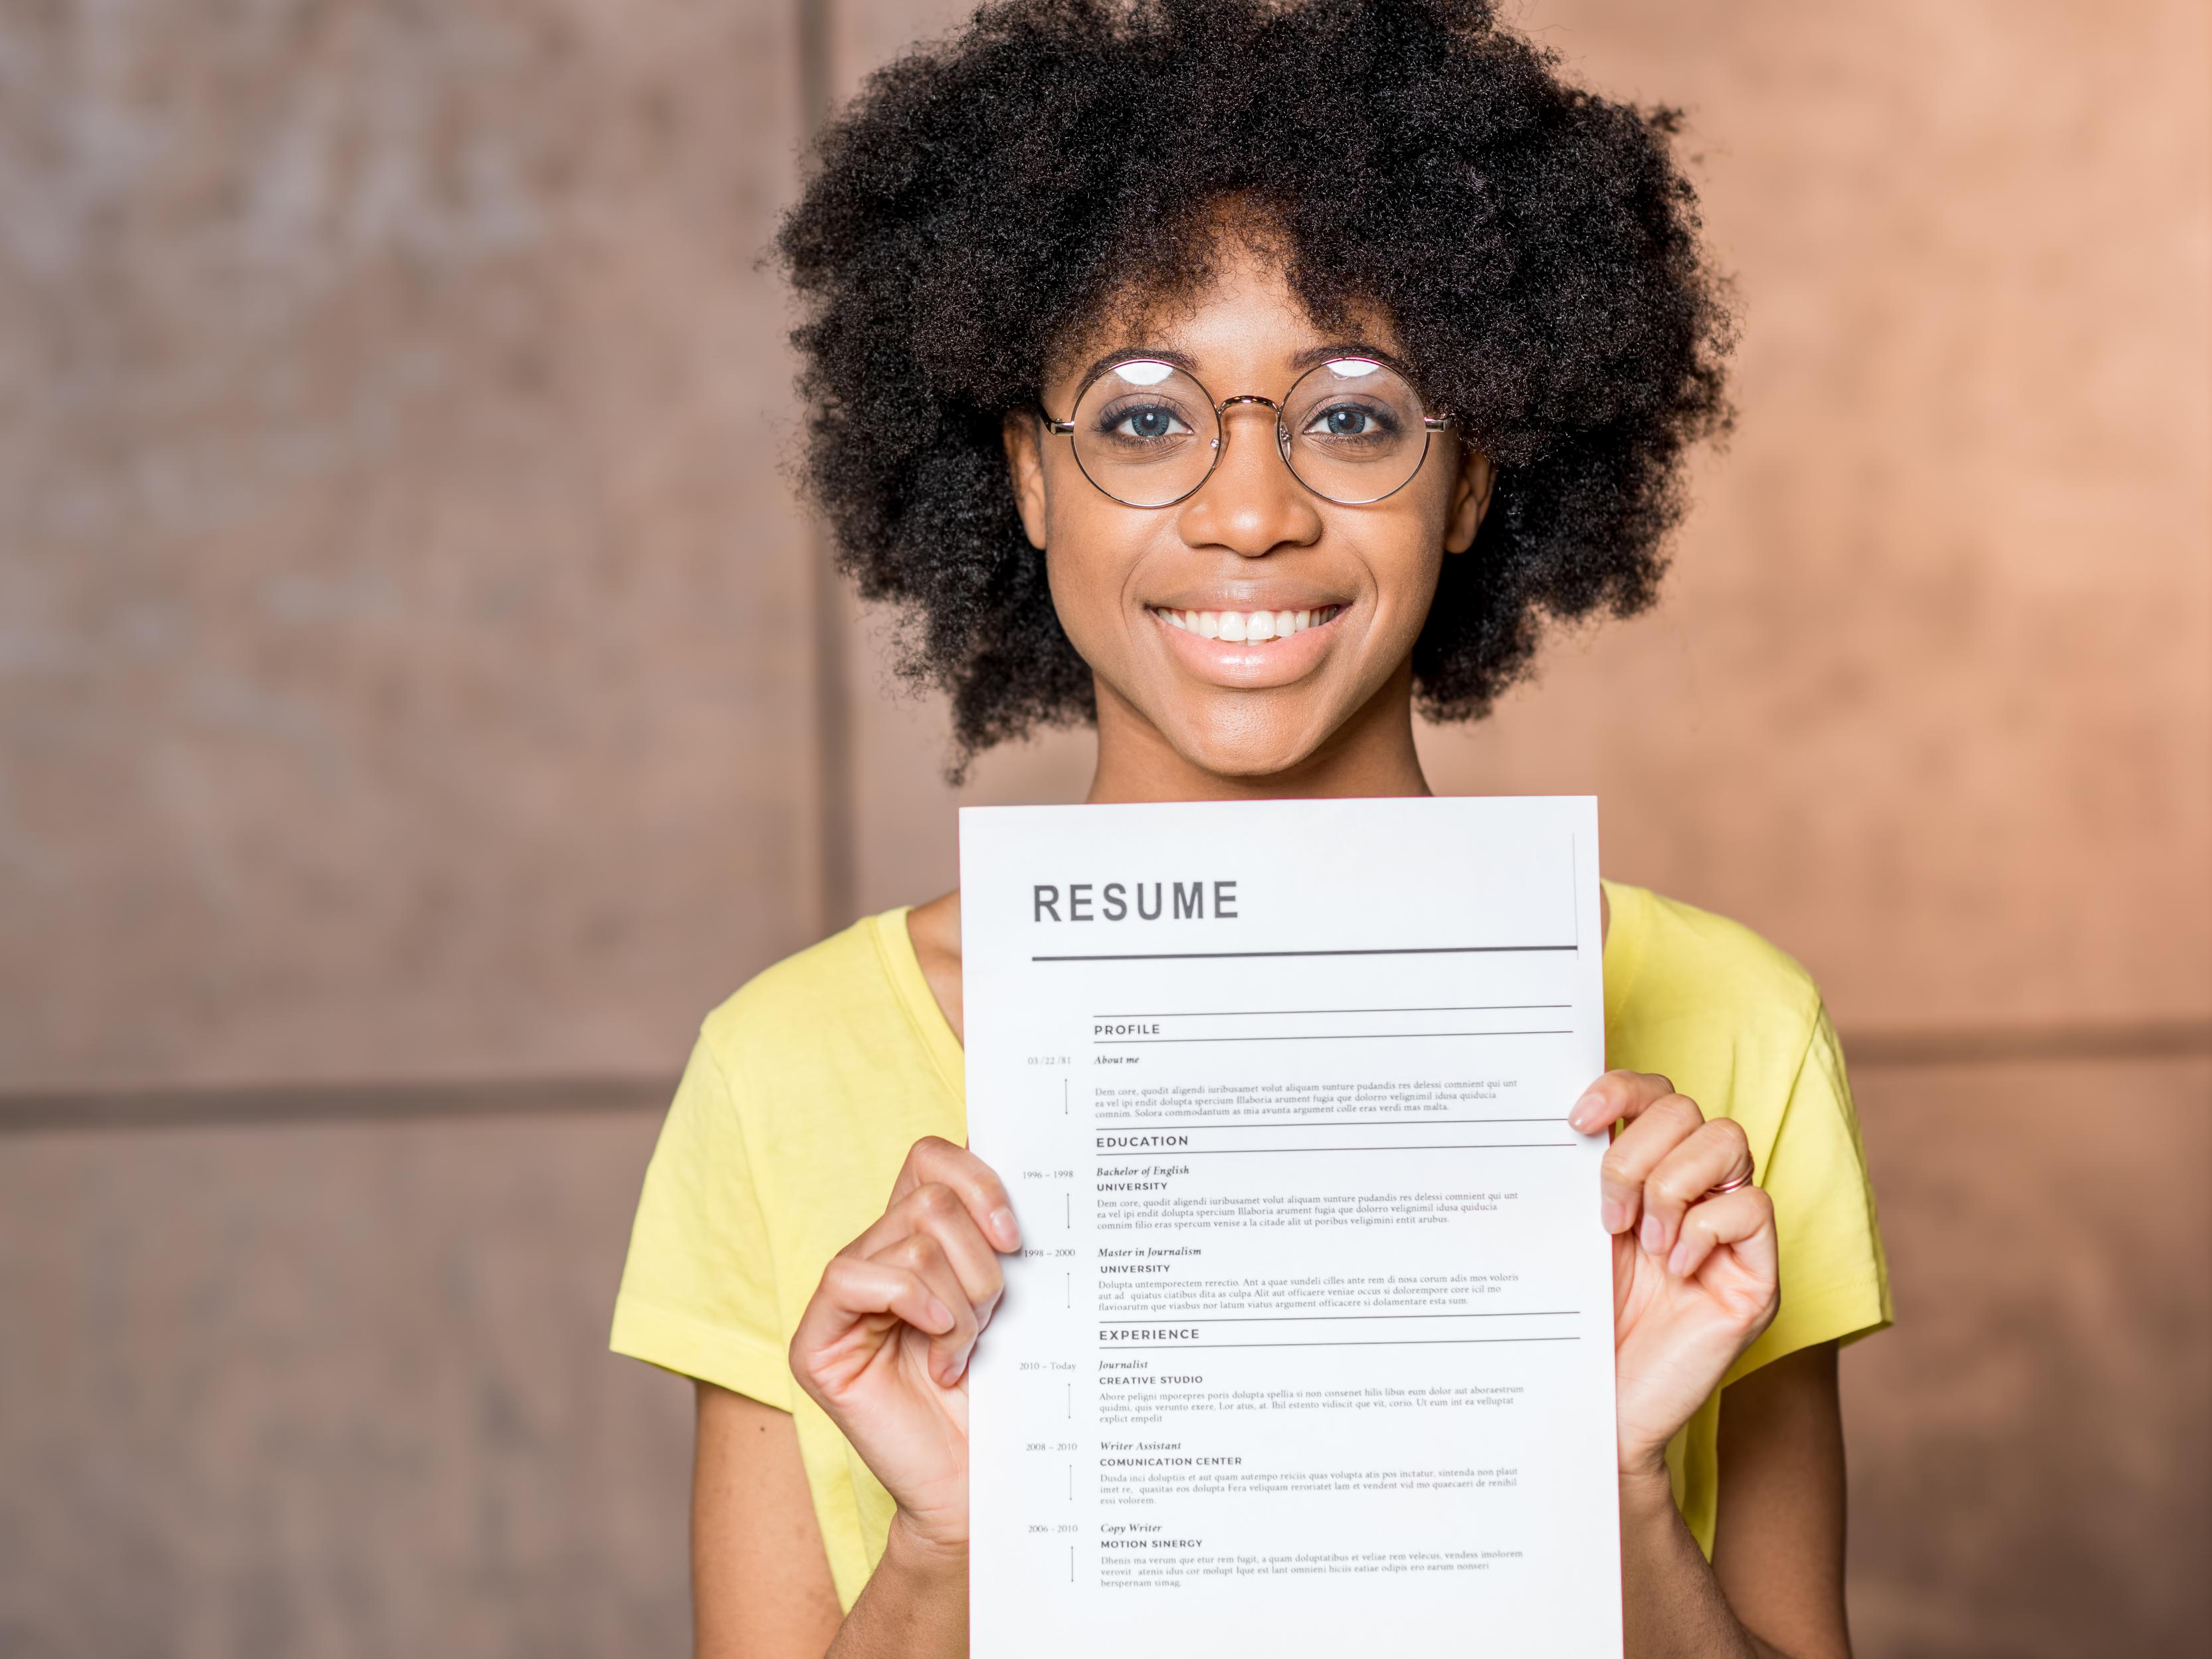 A young black woman with afro hairstyle and round spectacles, smiling and holding up her resume